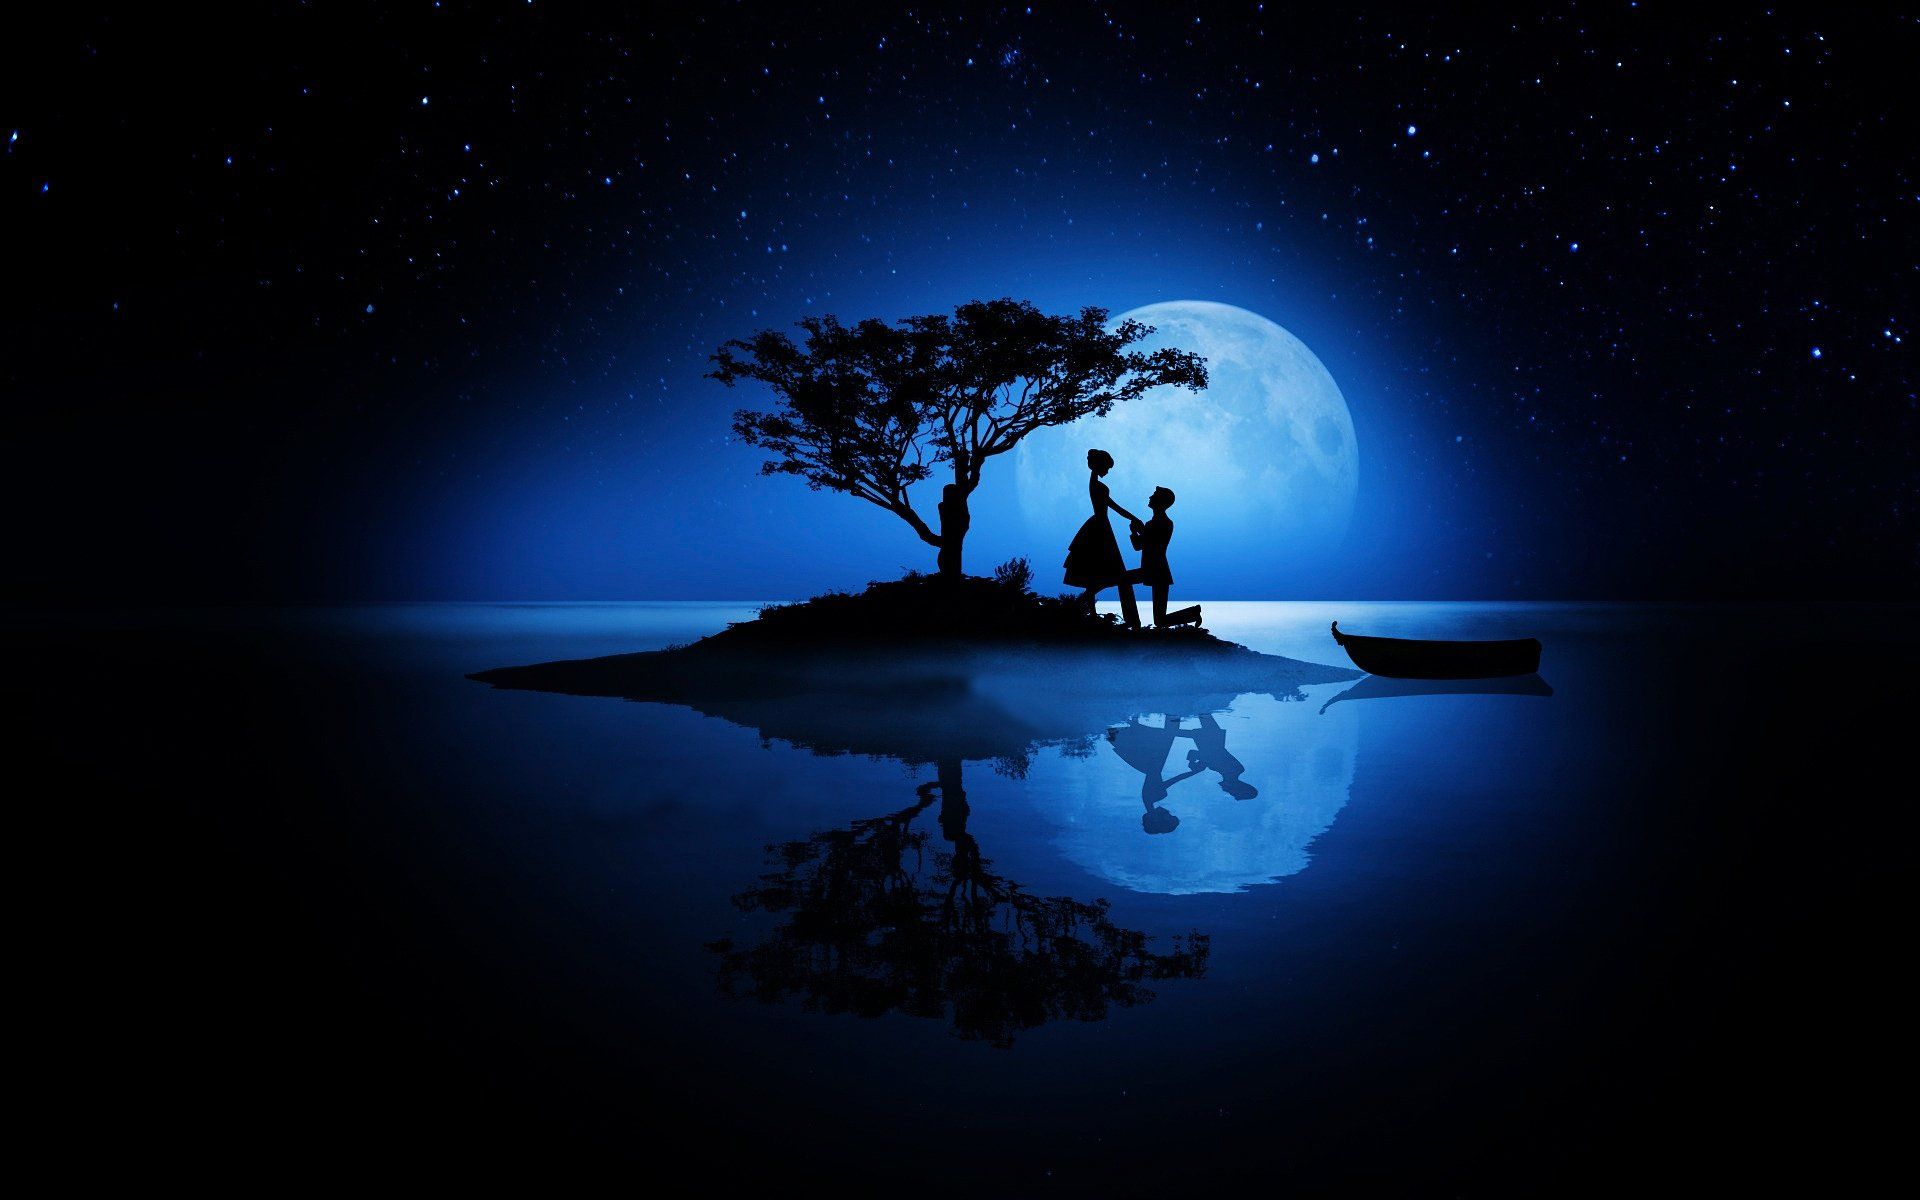 Wallpaper, 1920x1200 px, boat, couple, day, happy, lake, love, married, me, Moon, night, reflected, reflection, romance, silhouettes, sky, stars, tree, Valentineand039s, vector, water 1920x1200